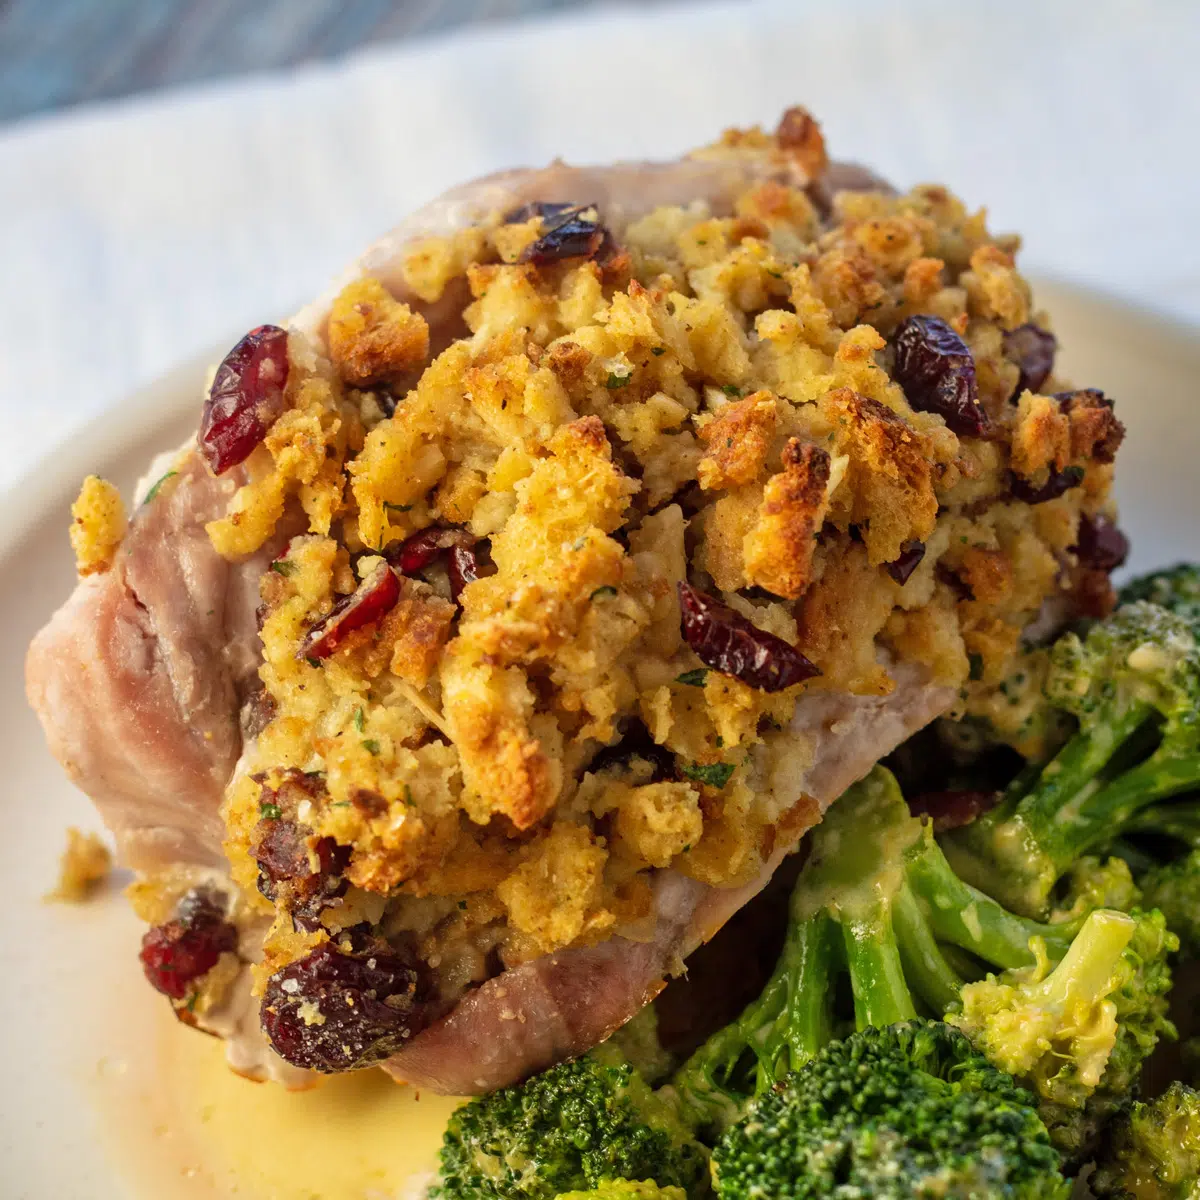 Stuffing stuffed pork chops on white plate with broccoli.